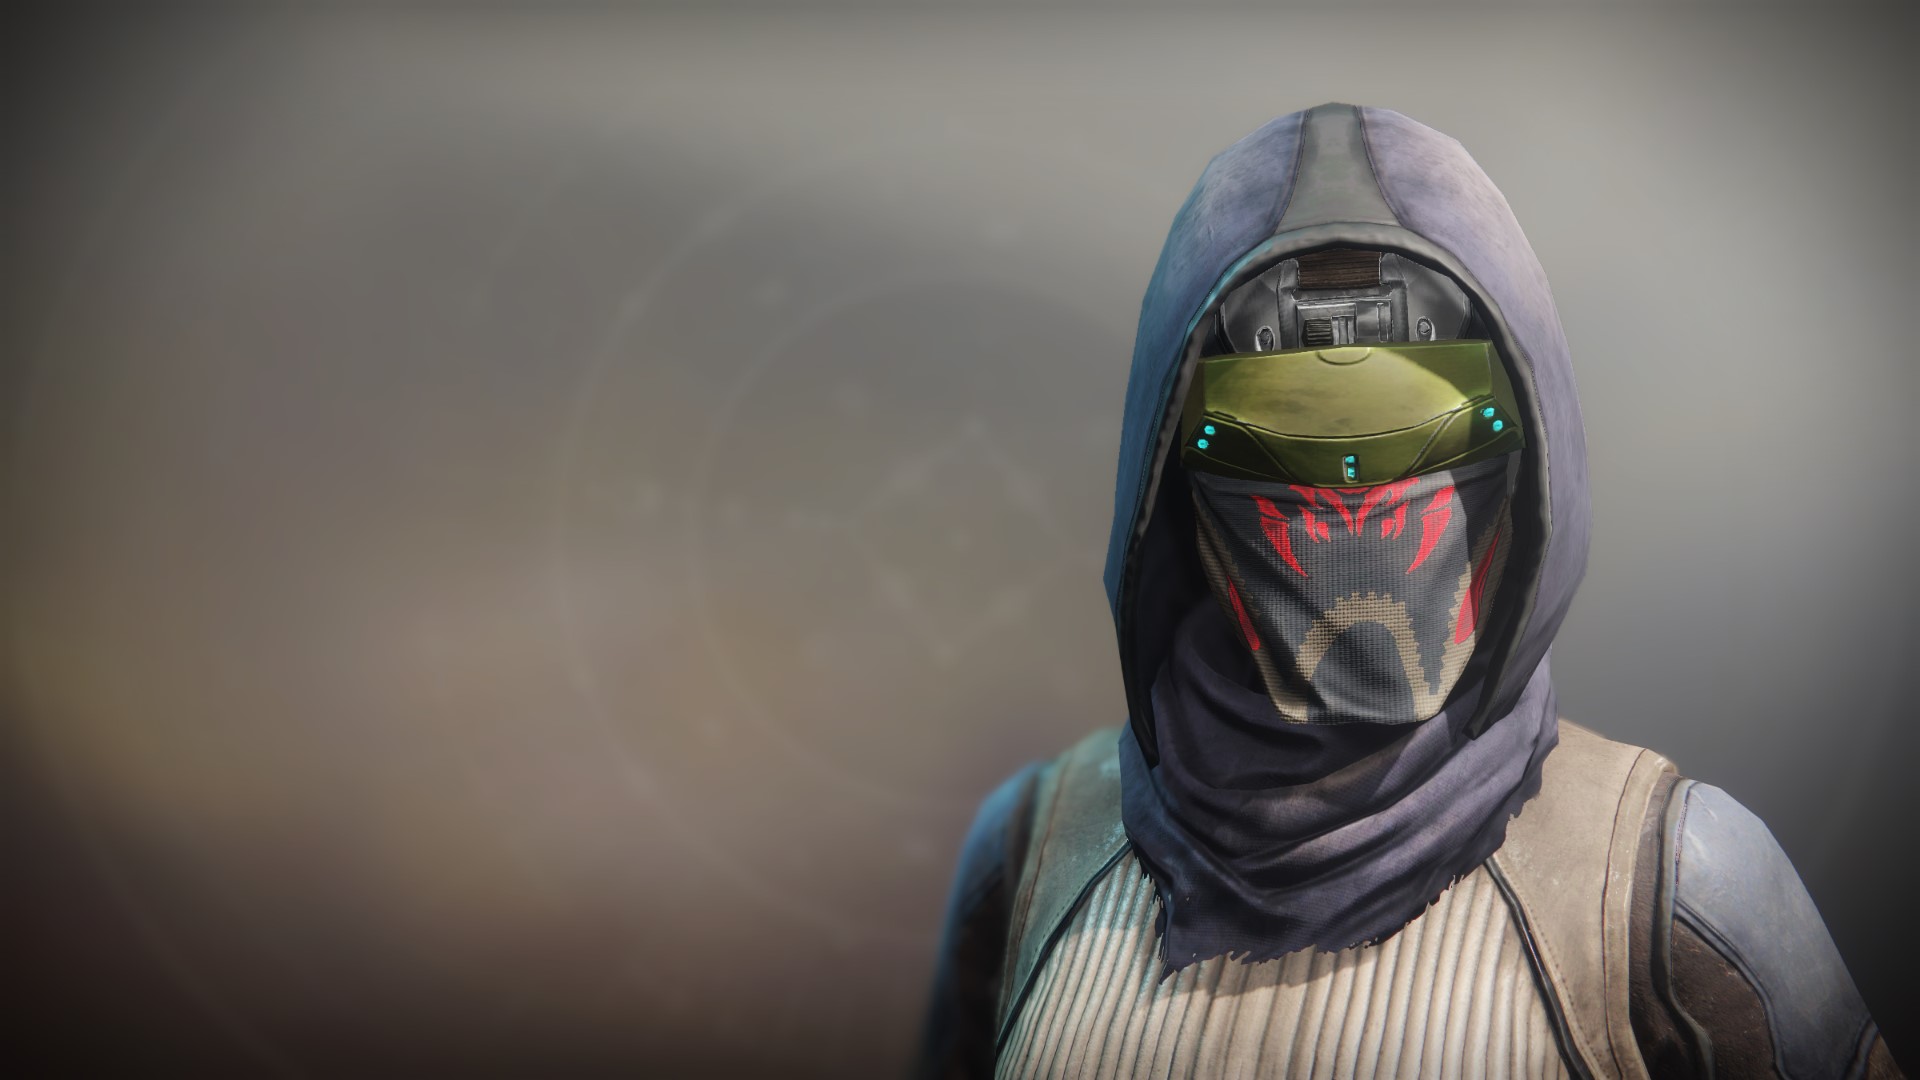 An in-game render of the Illicit Invader Mask.